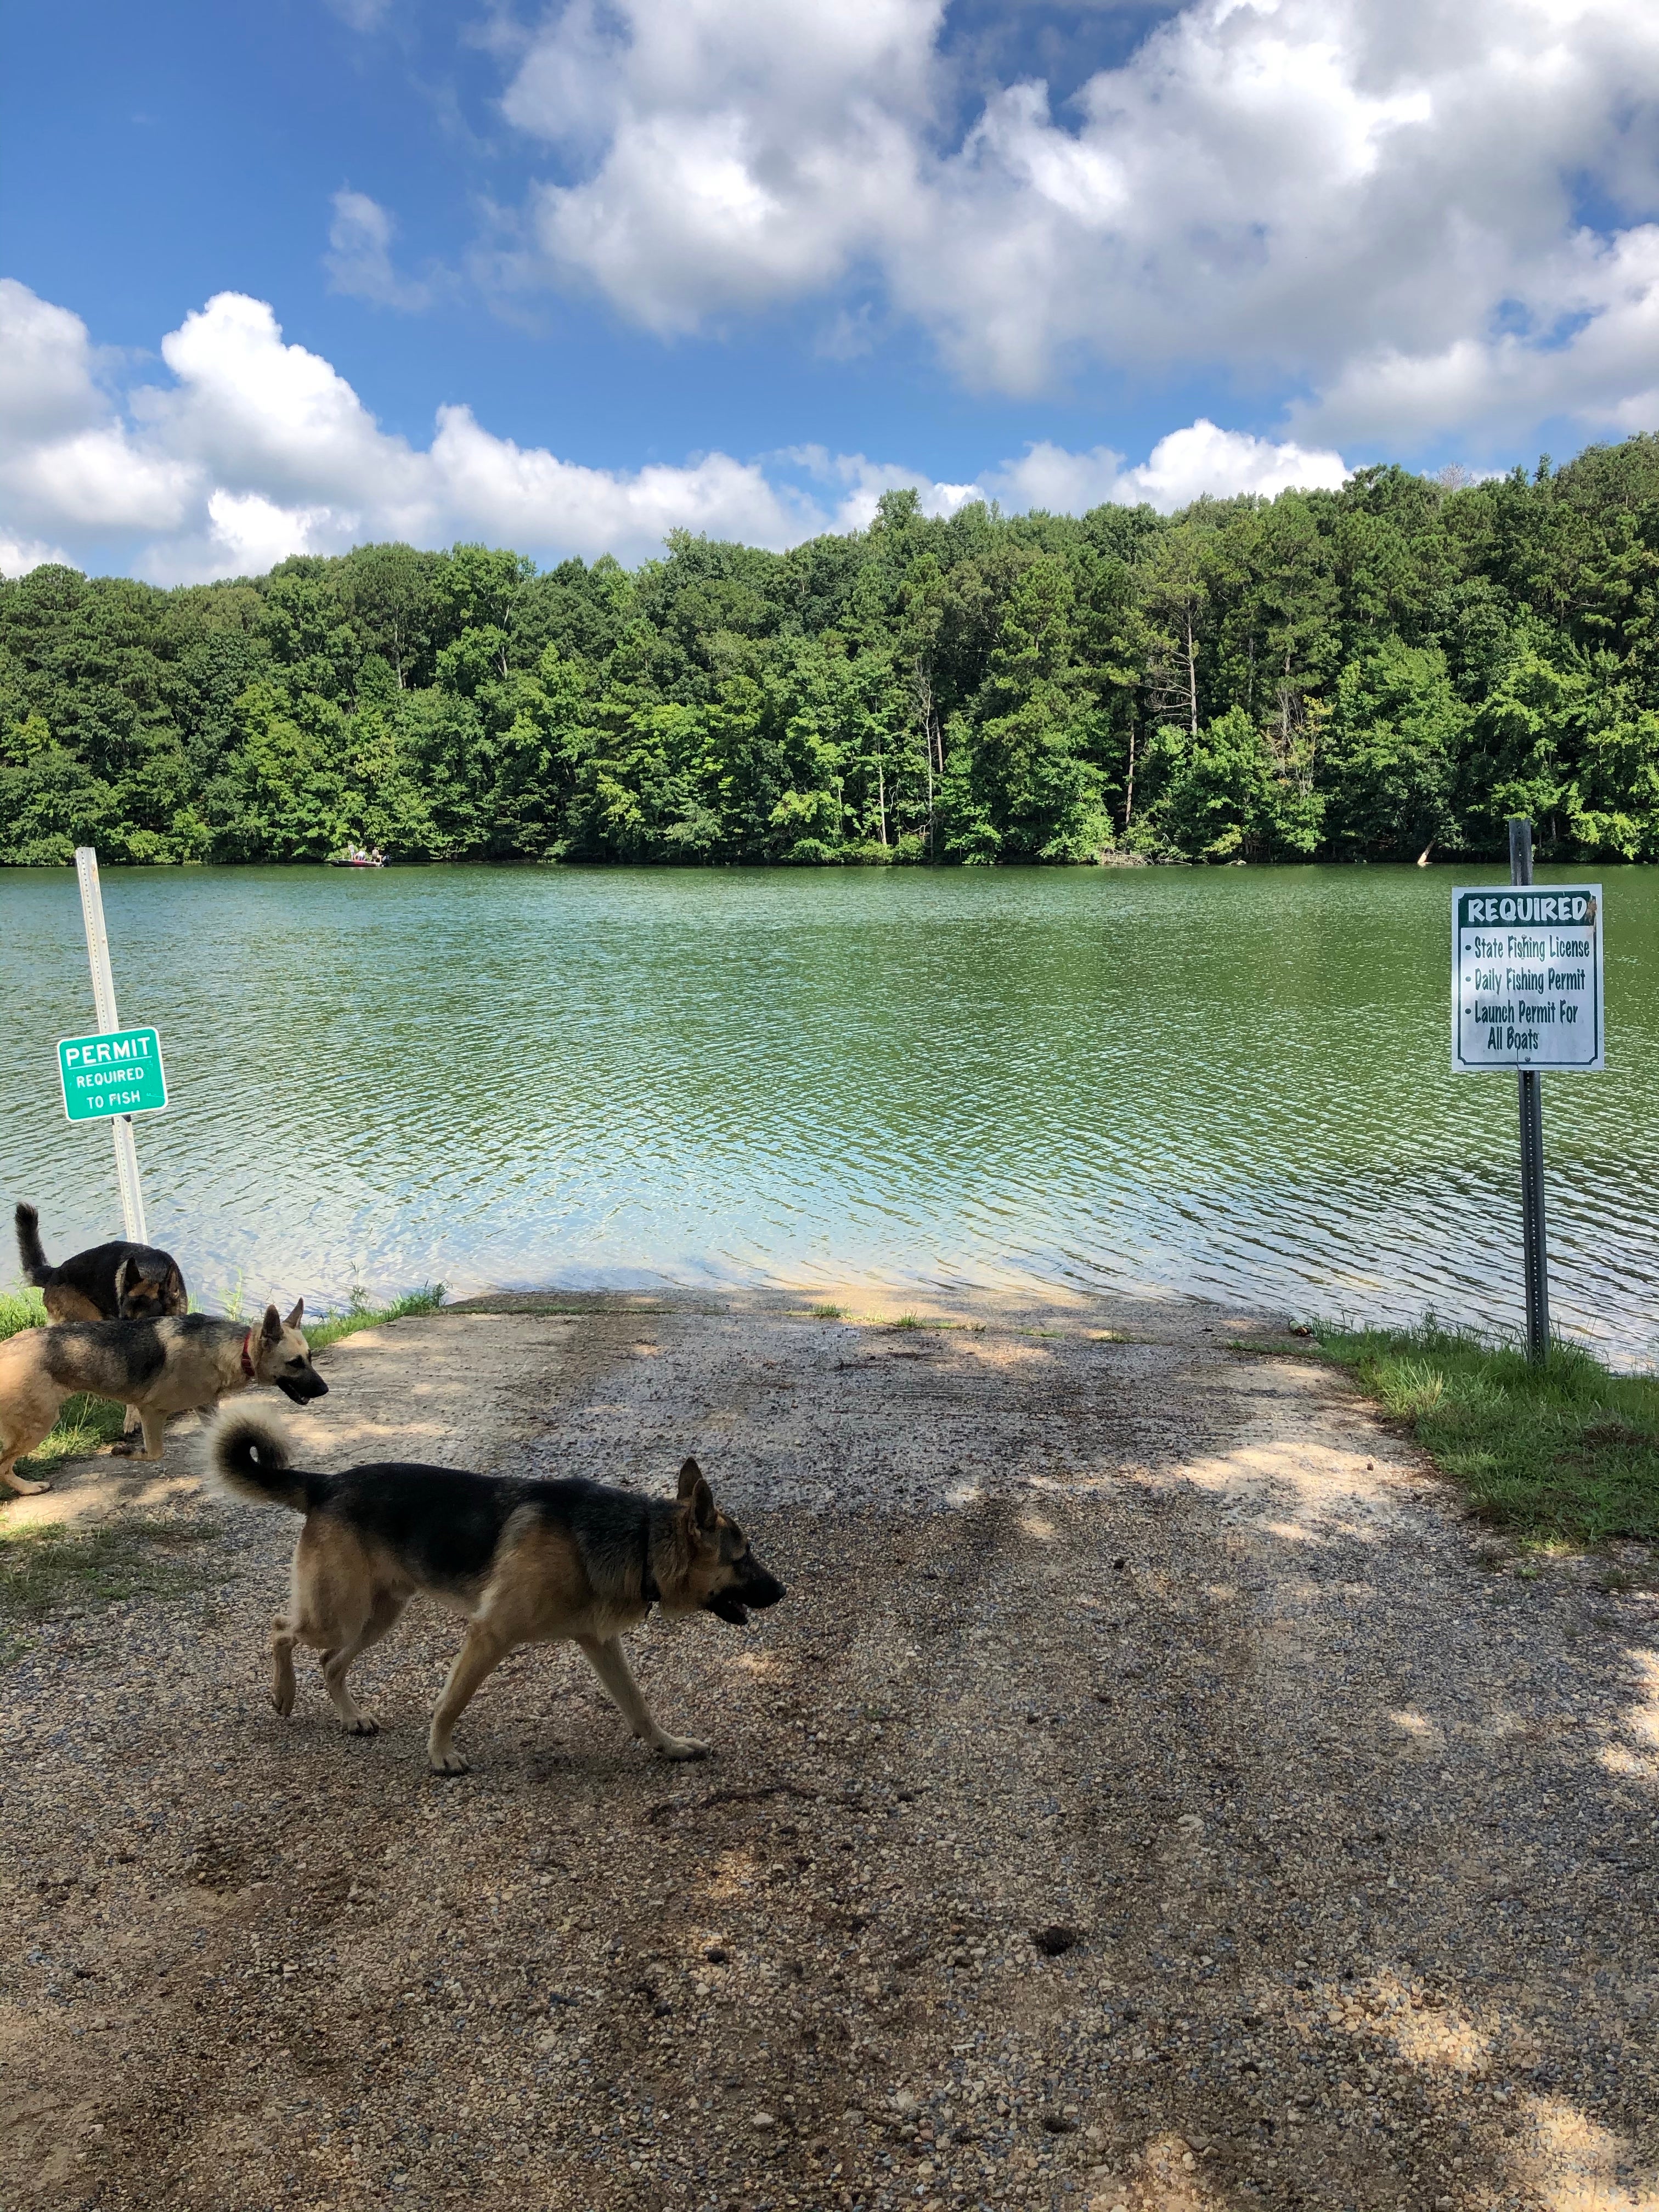 Camper submitted image from Dekalb County Public Lake - 4